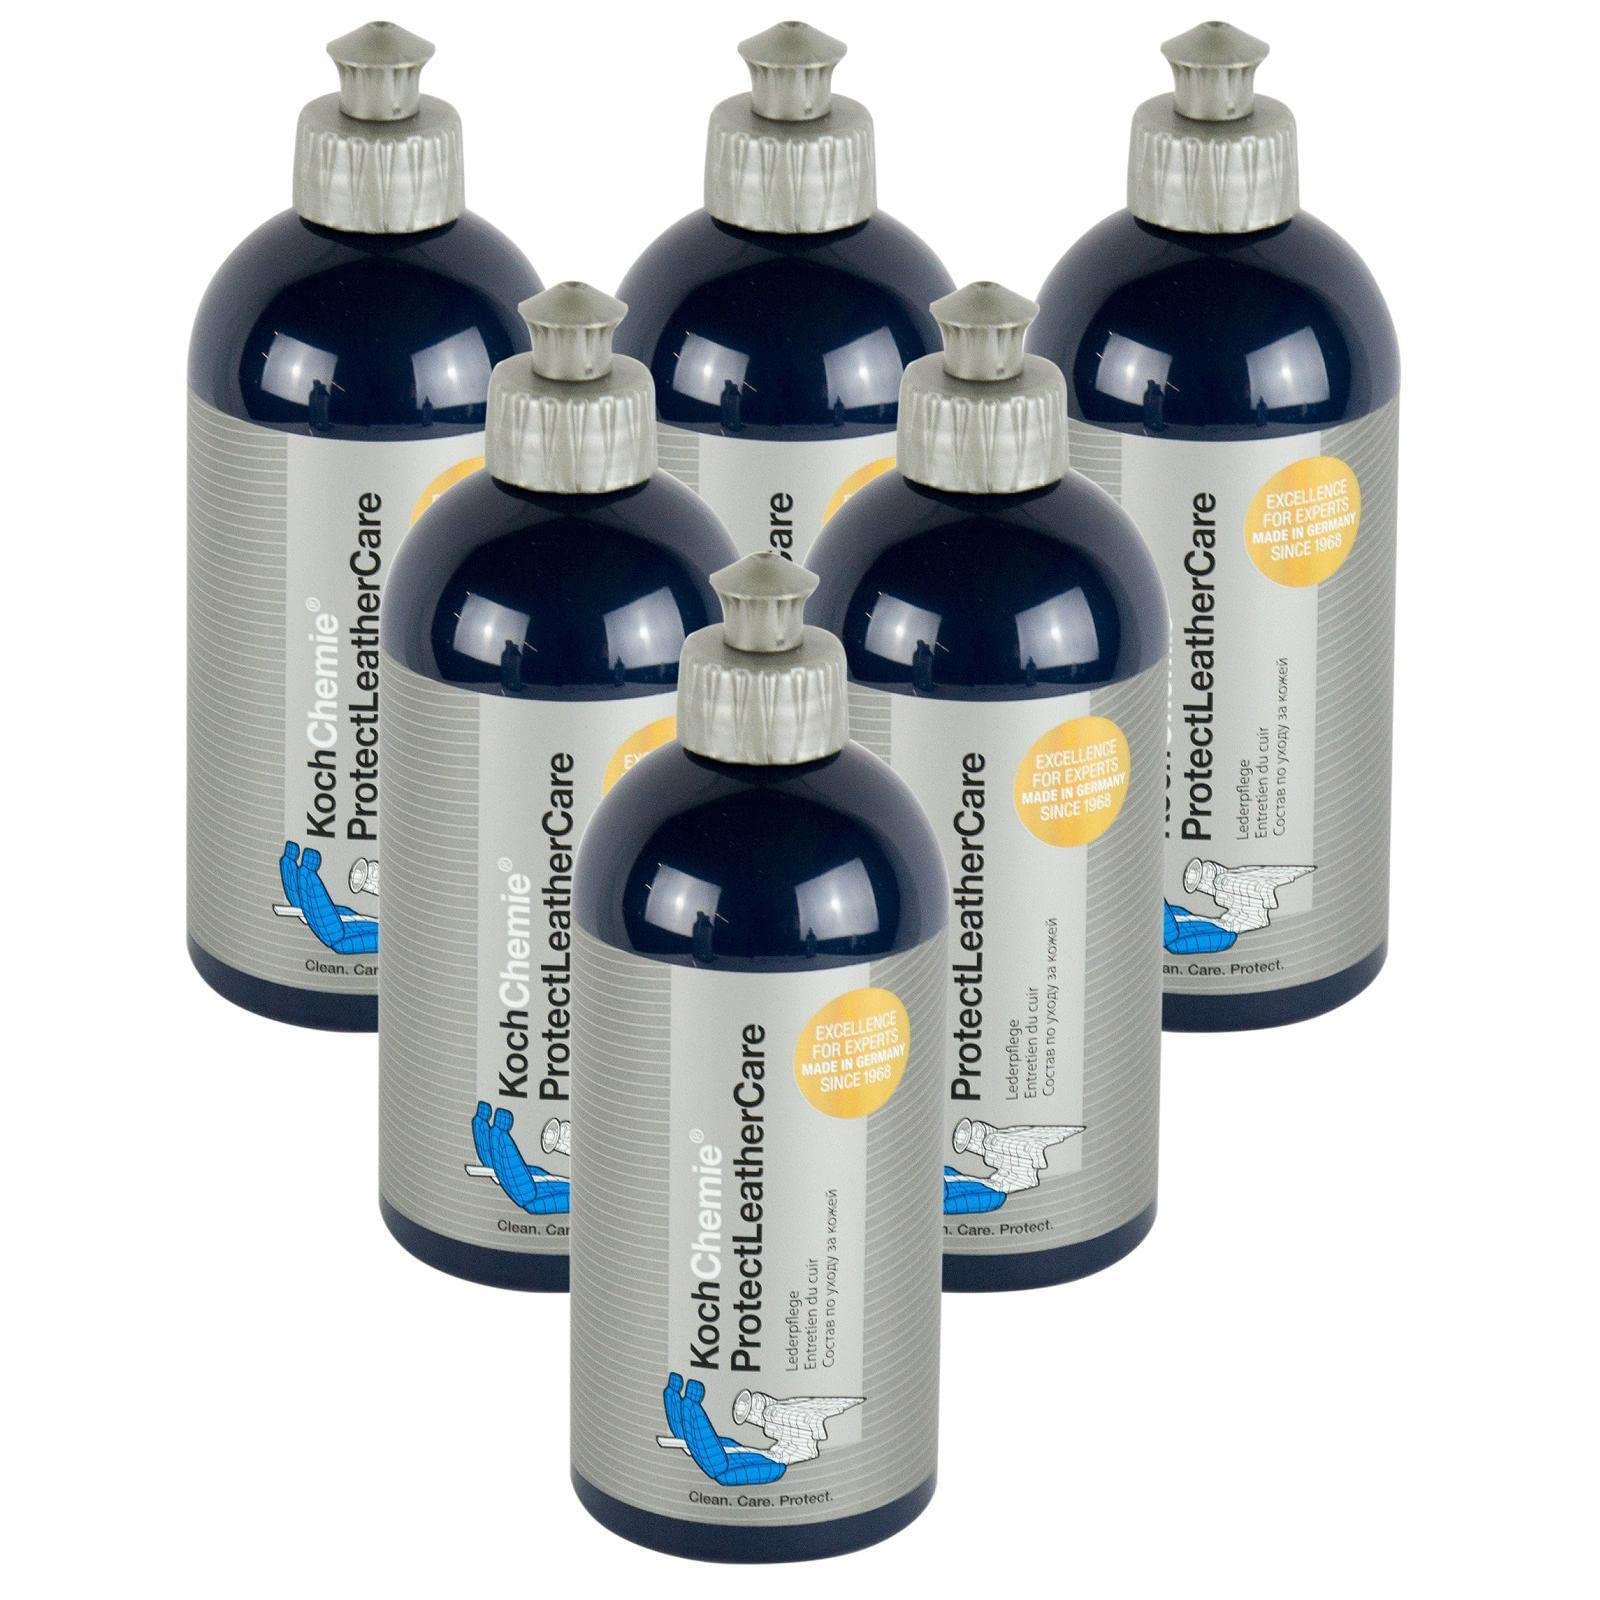 KOCH CHEMIE 6X Protect Leather Care Lederpflege Lederreiniger Reiniger 500 ml von KOCH CHEMIE